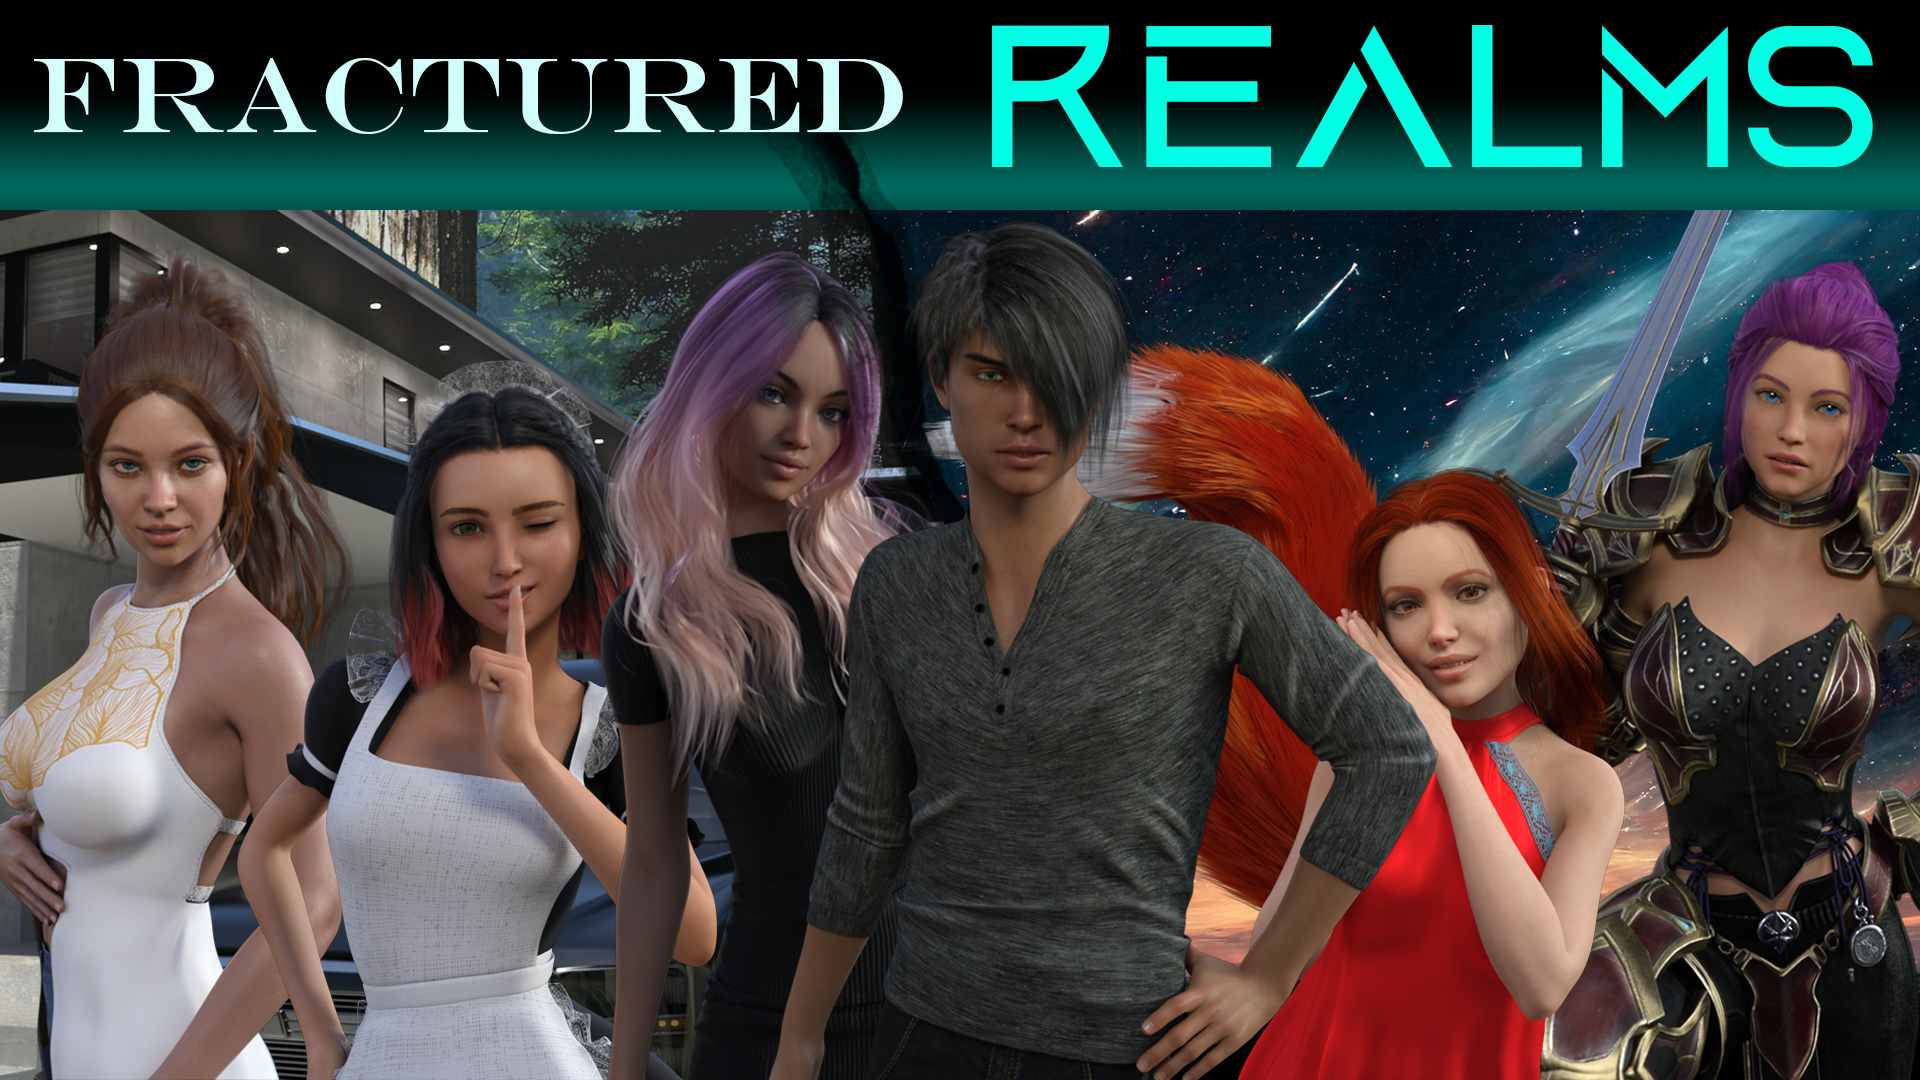 Fractured Realms [Virt Studios] Adult xxx Game Download